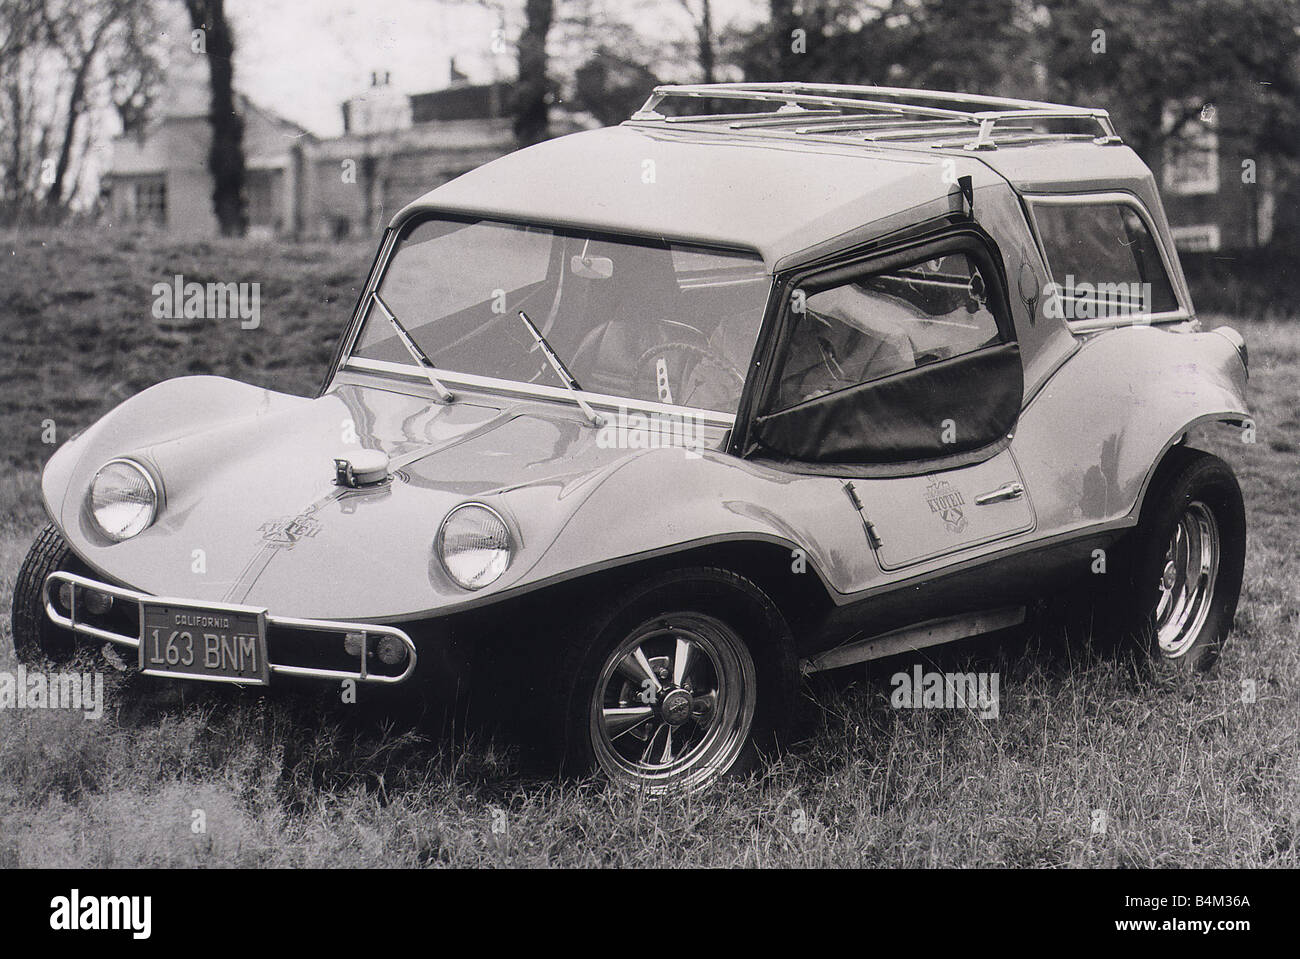 American designed Kyote II buggy A glass fibre bodied car based on a VW Beatle chasis Cost when new 1 100 Fibre glass body kit cost 350 beach buggy alloy wheels roof rack Stock Photo